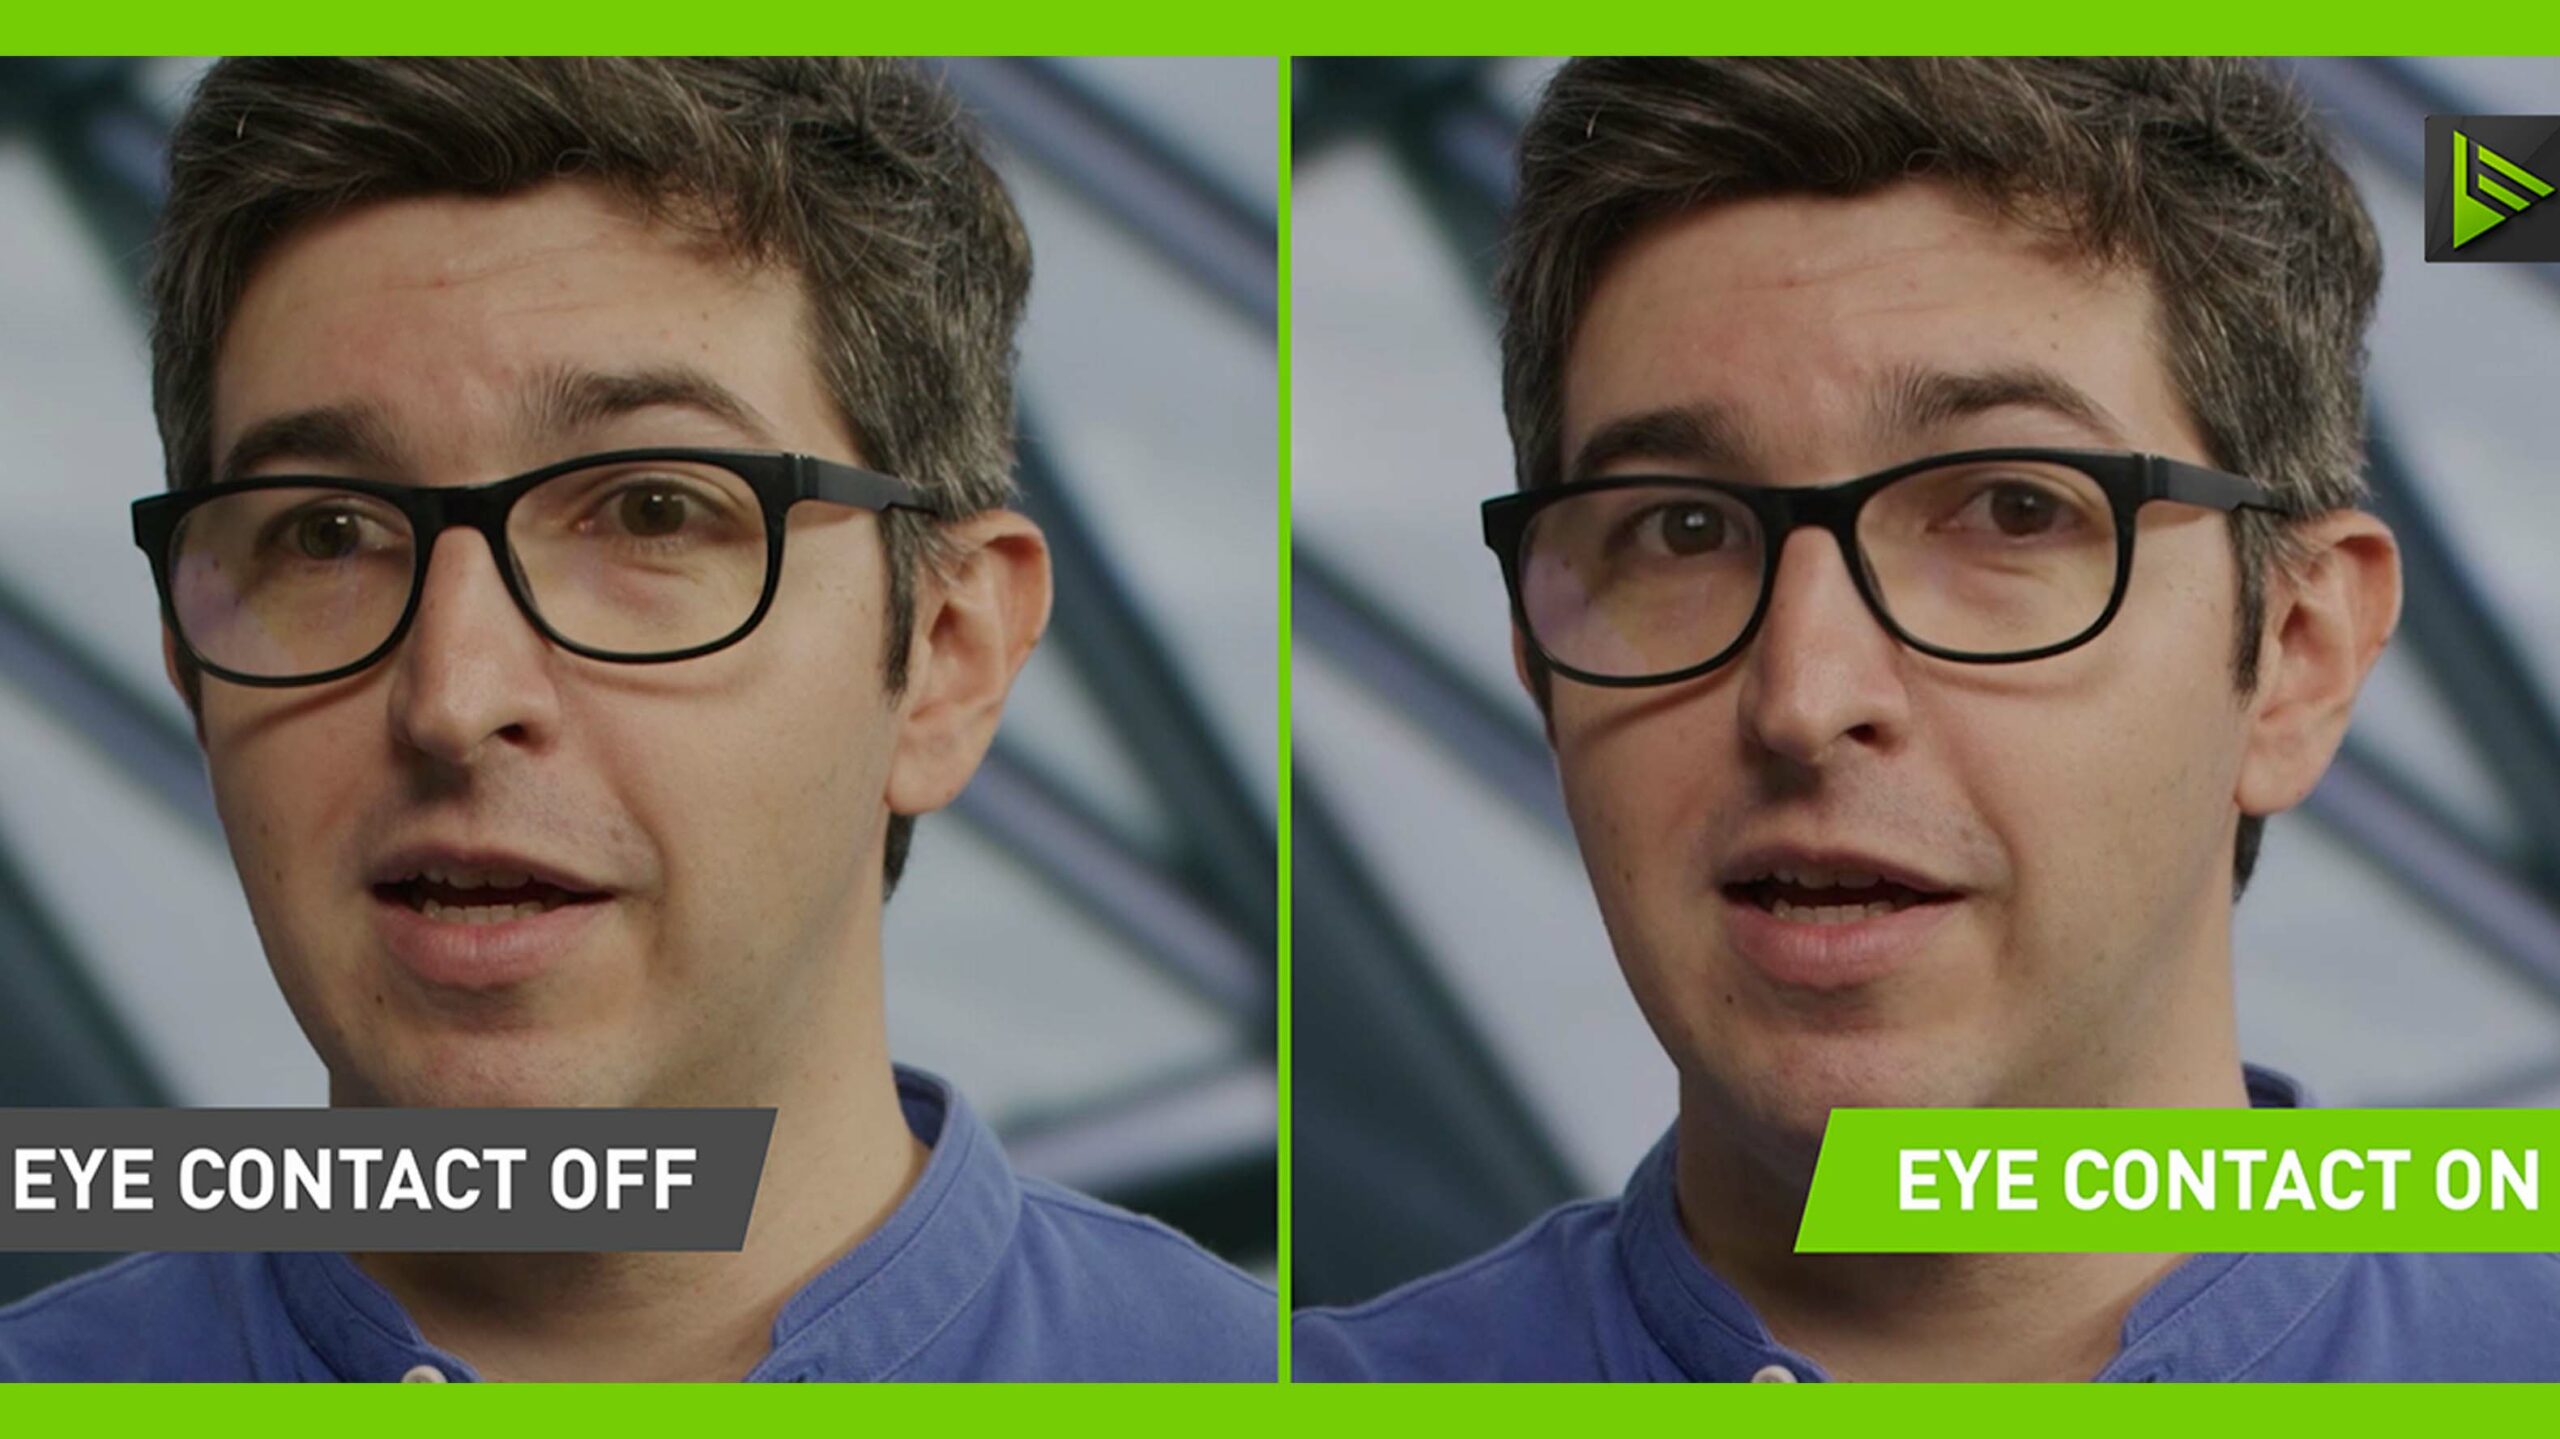 Nvidia’s eye contact feature looks creepy as hell